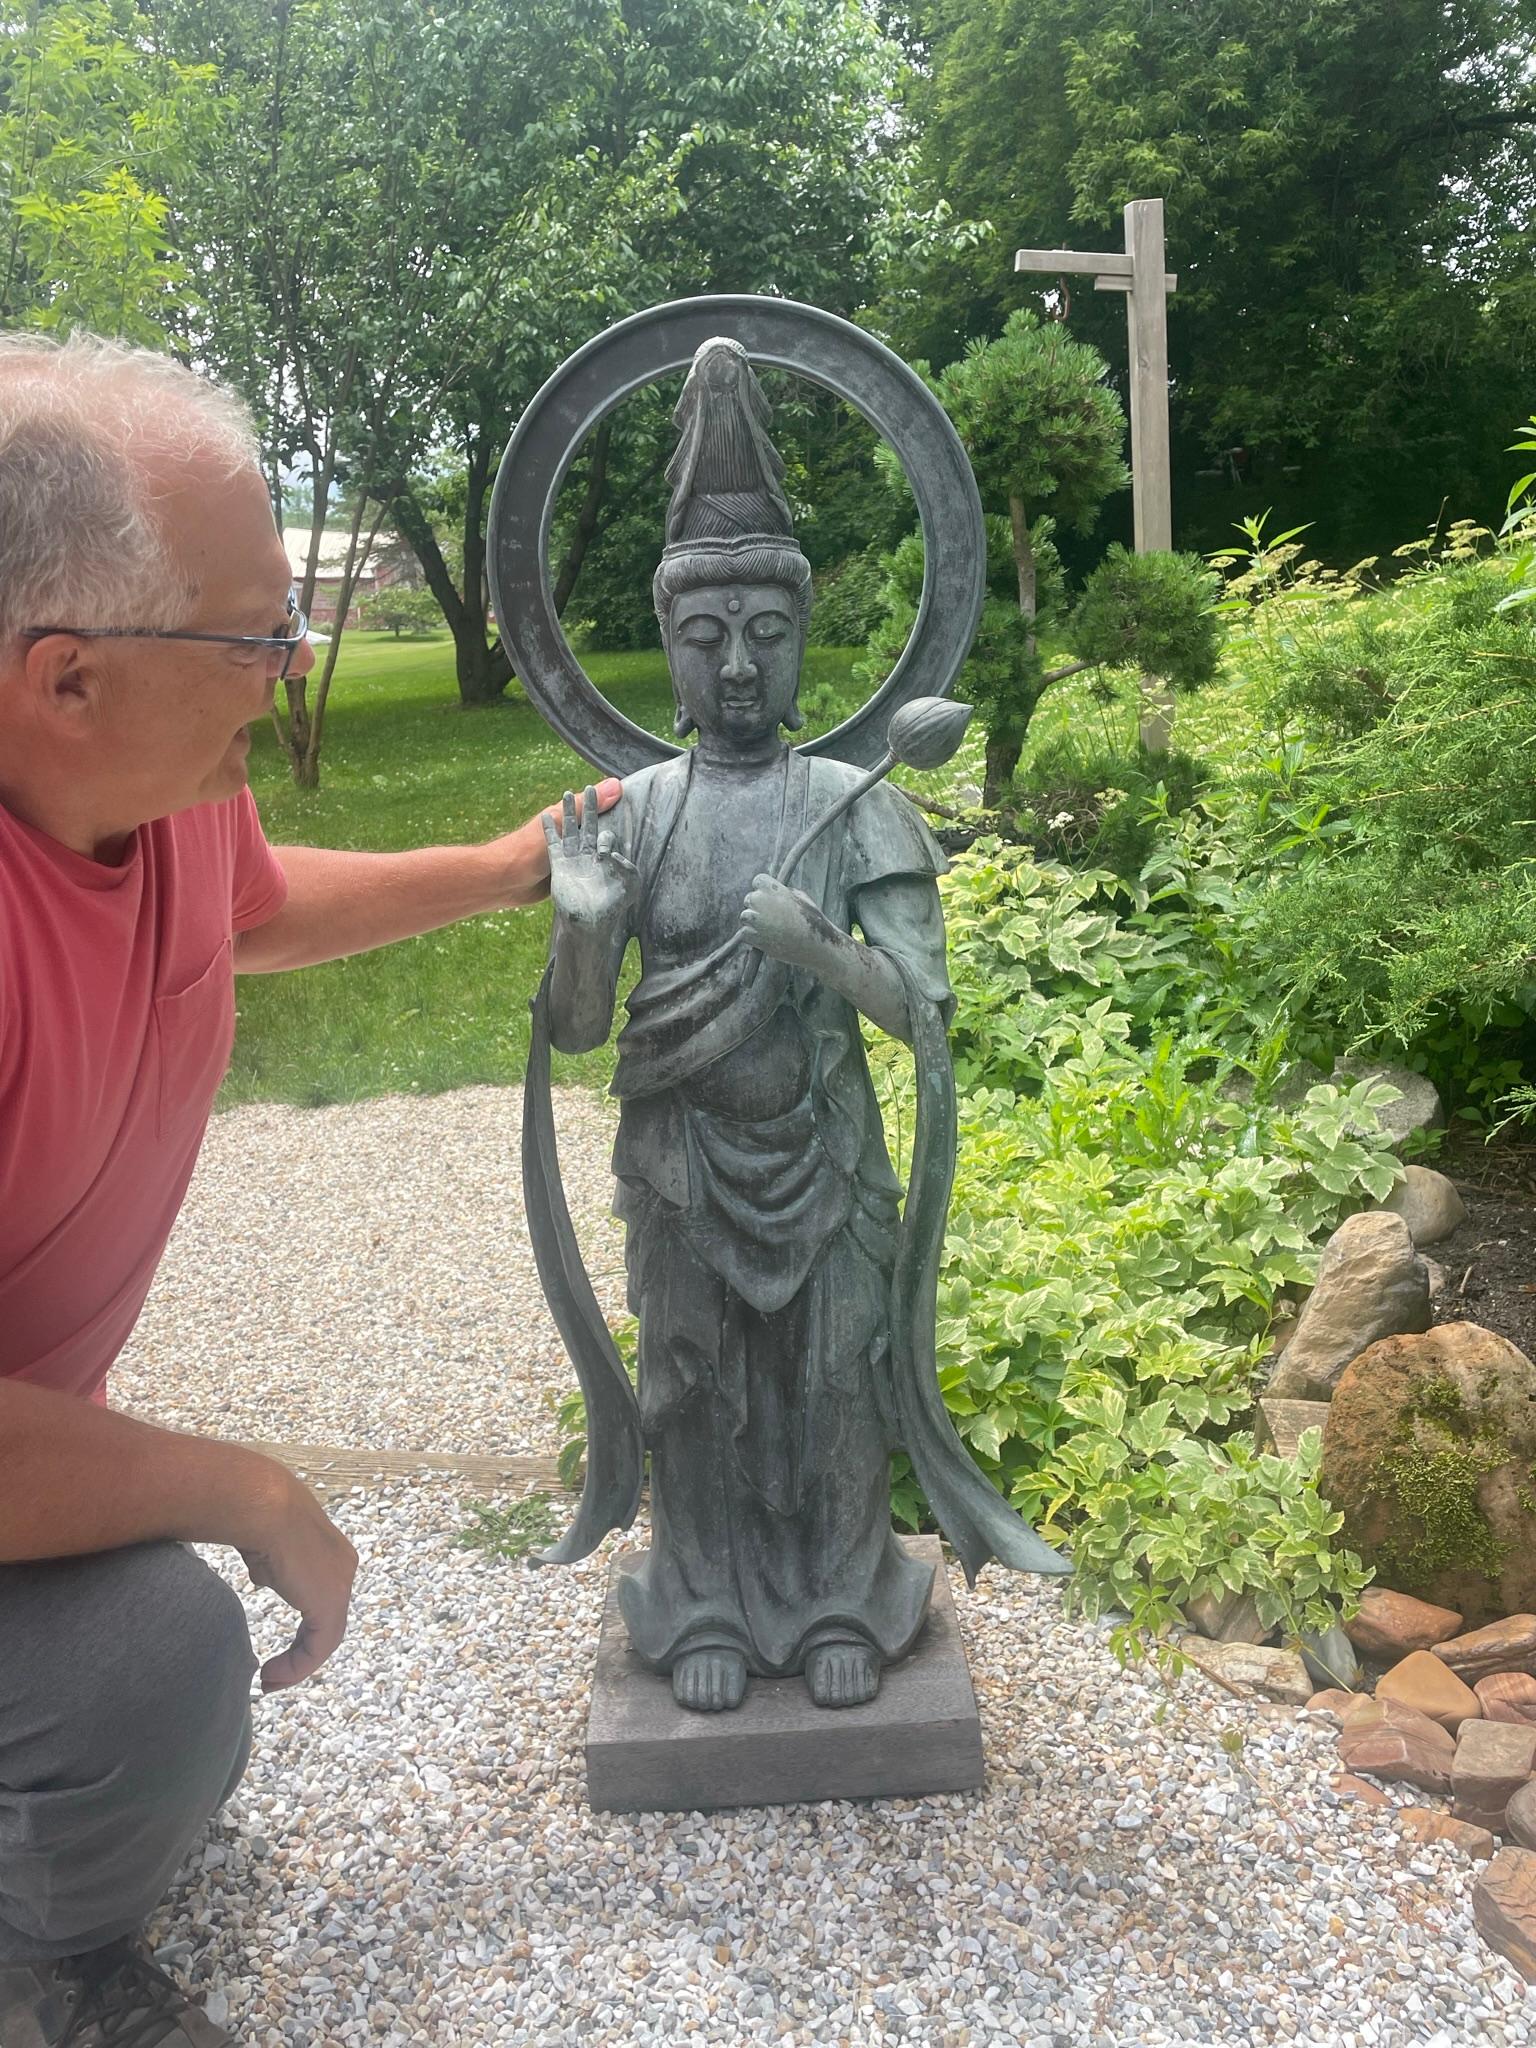 Good garden choice or special indoor gallery display

Japan, an elegant and finely cast antique bronze standing Kanon Maitreya or Guan Yin clutching a lotus branch - a sign of purity- and with lovely pensive down cast facial expression and eyes, a